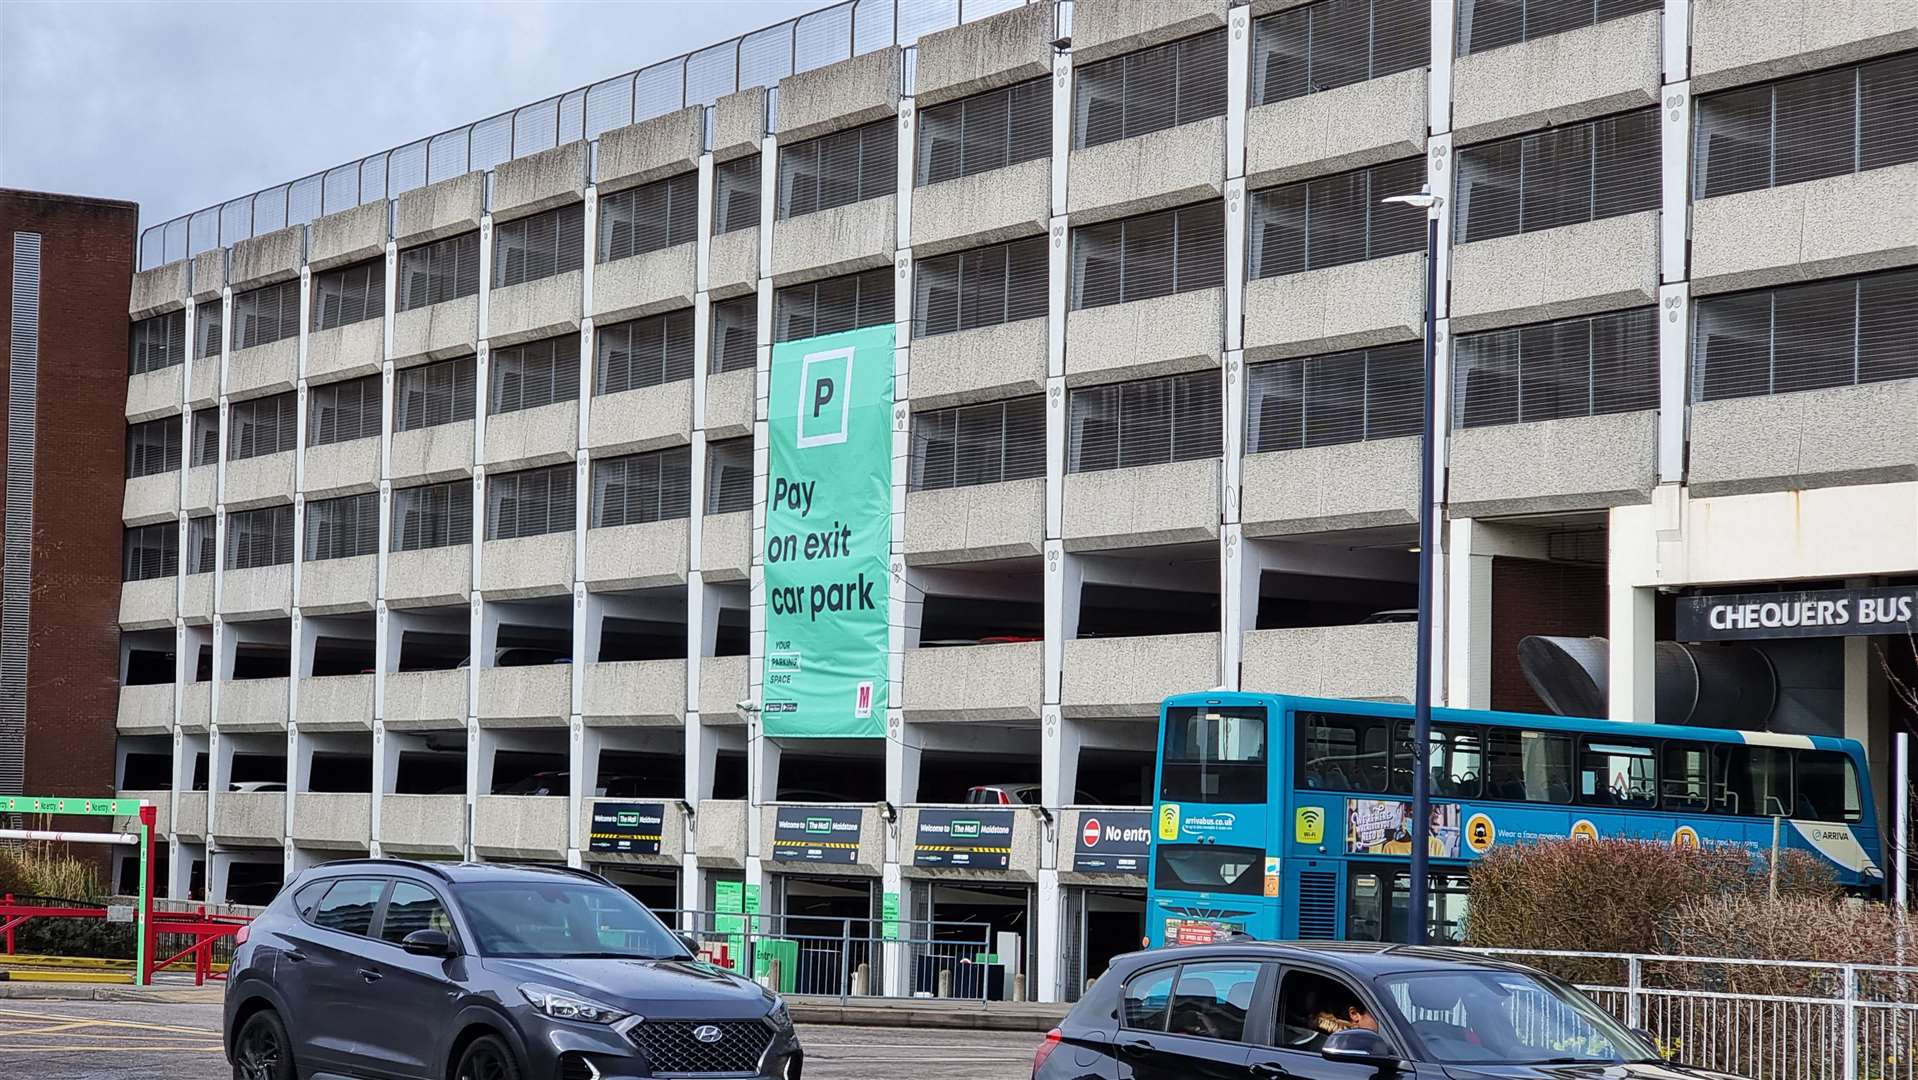 Ues yourparkingspace.co.uk to park at the Mall, Maidstone.